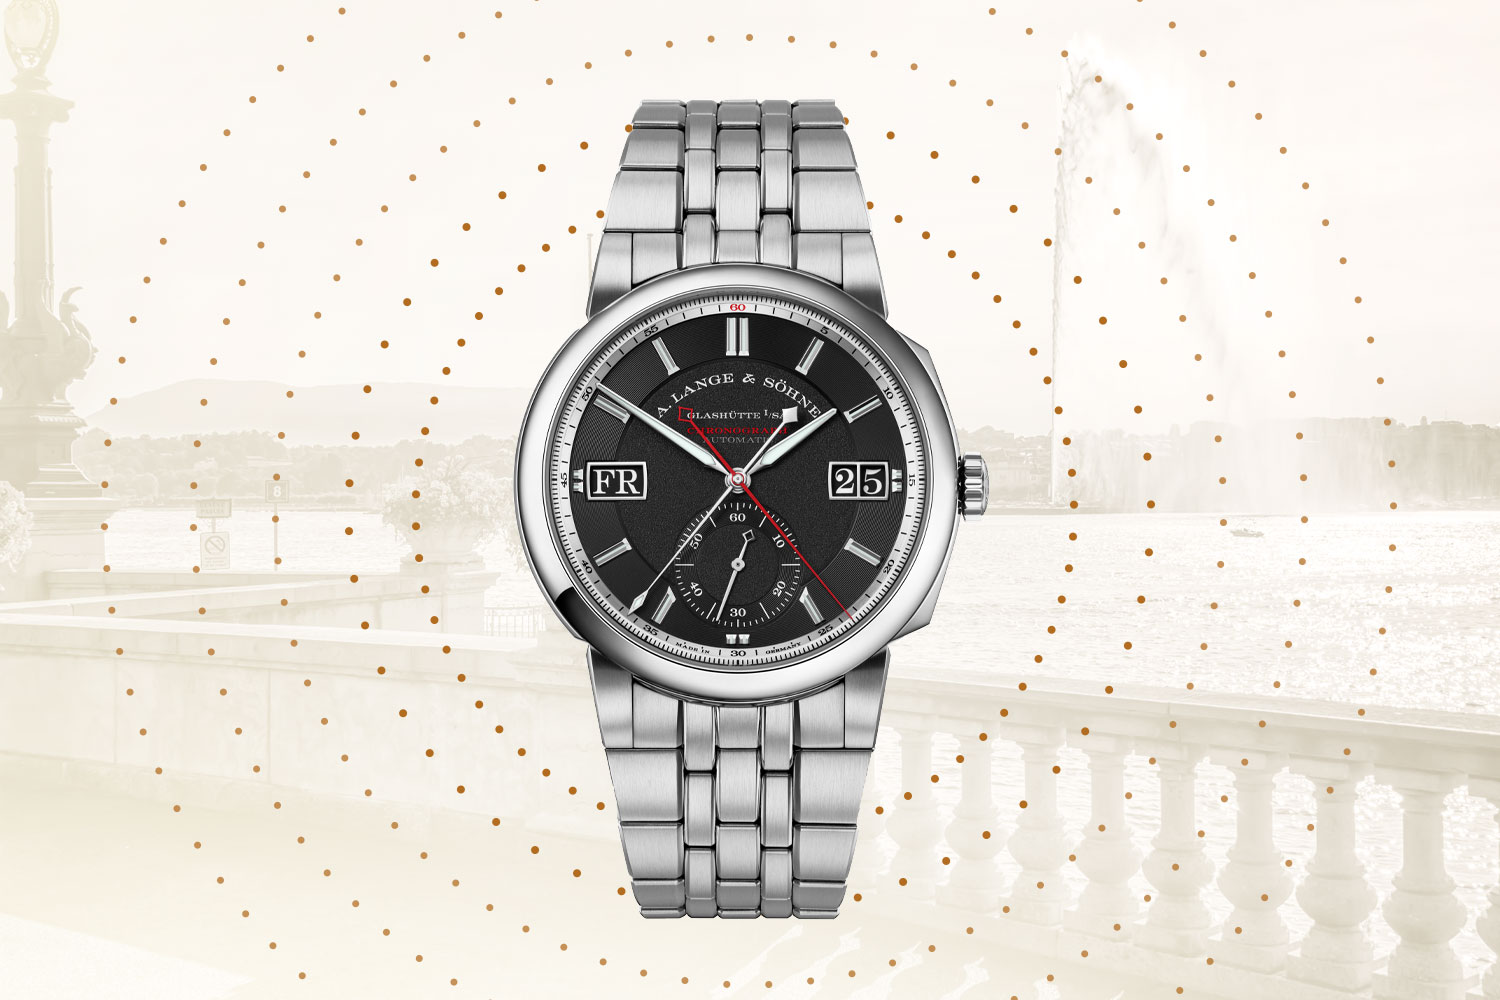 Silver watch on a patterned white background